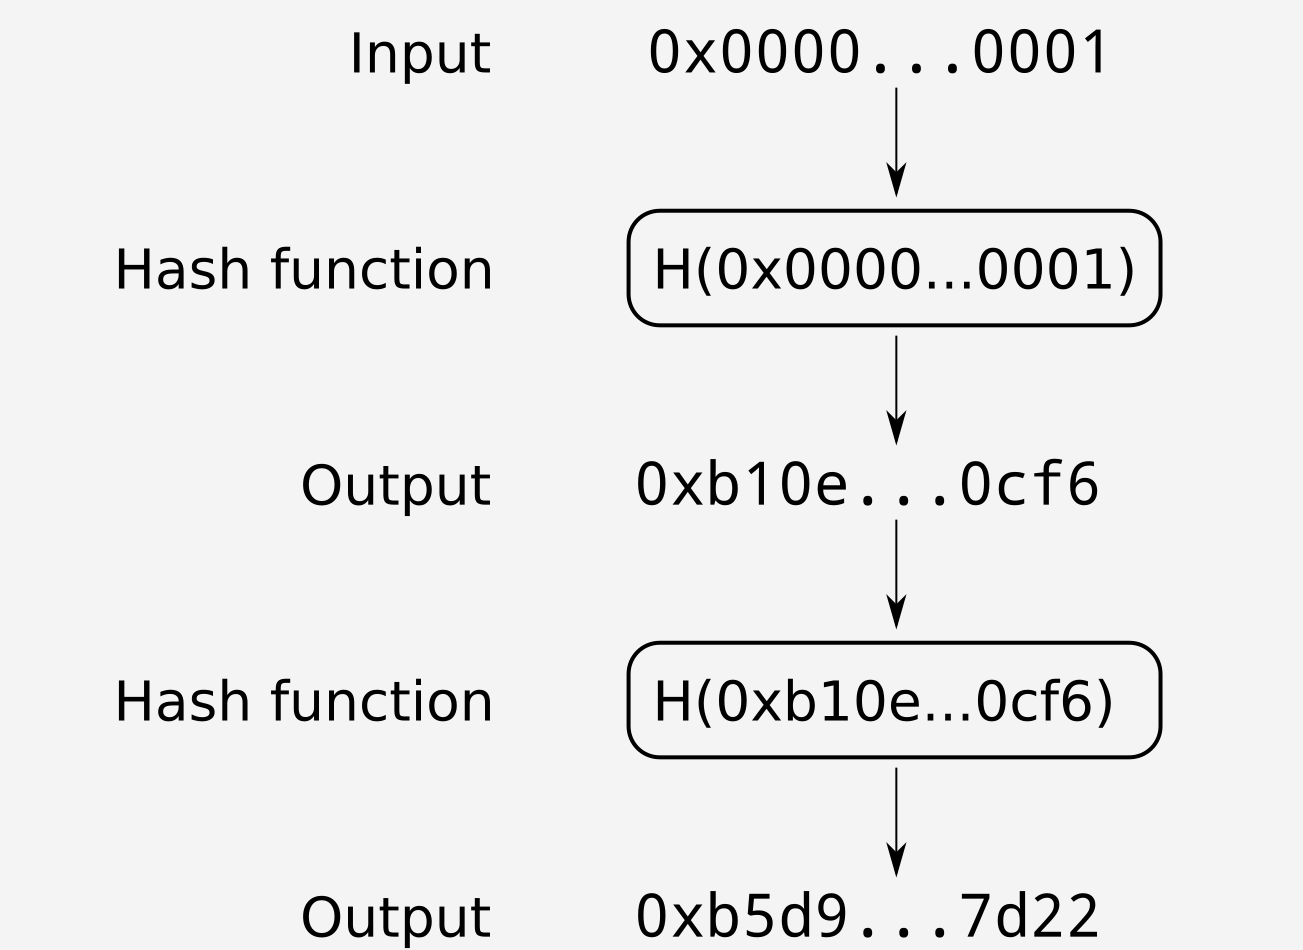 Hash table starting at $0x0000…0001$